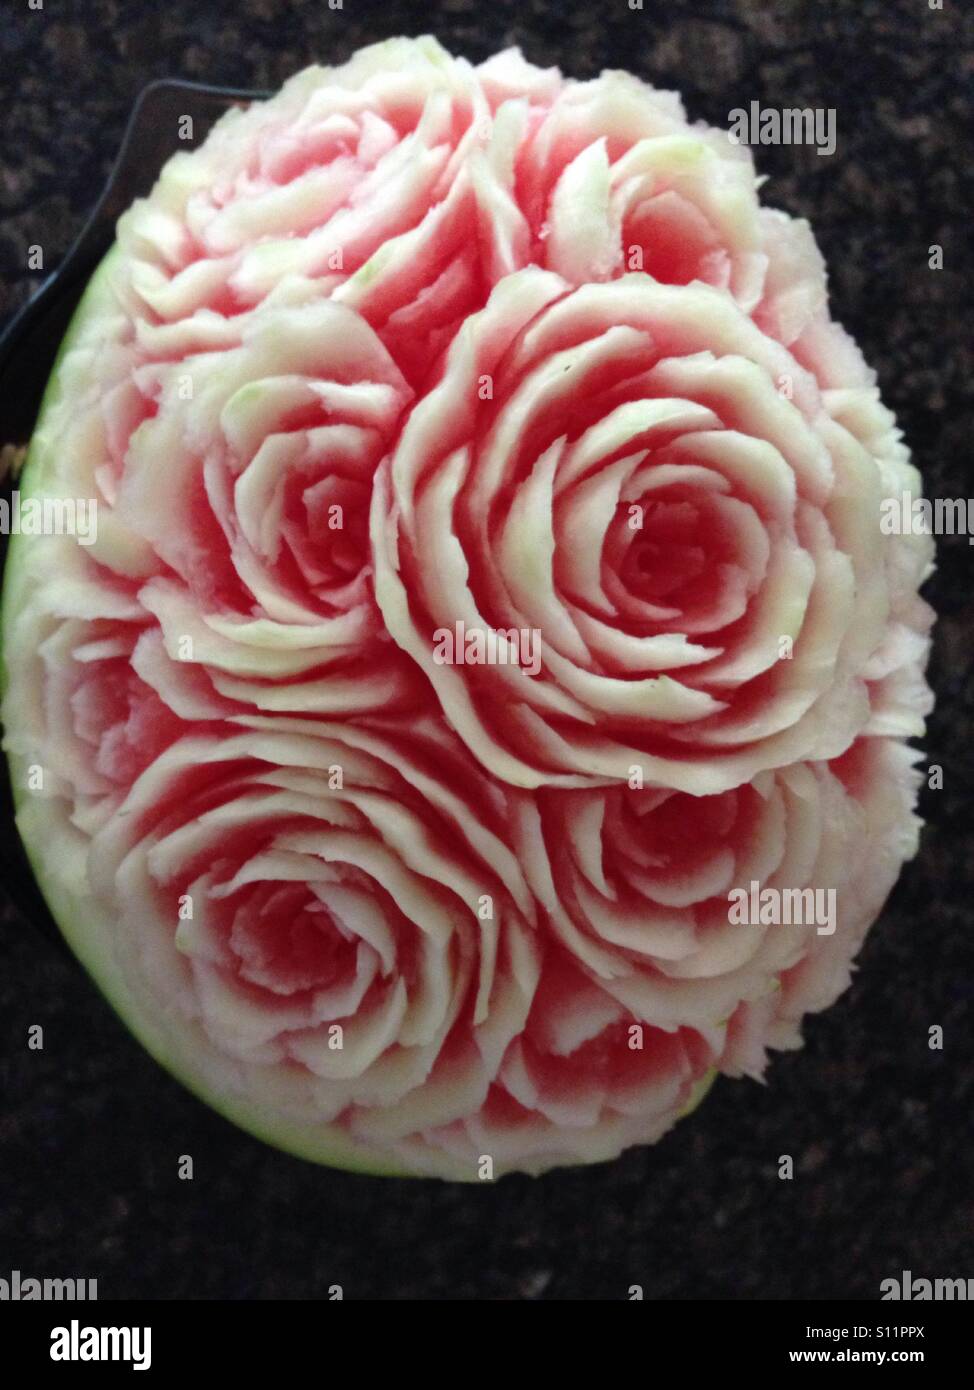 Fruit carving of roses using watermelon Stock Photo